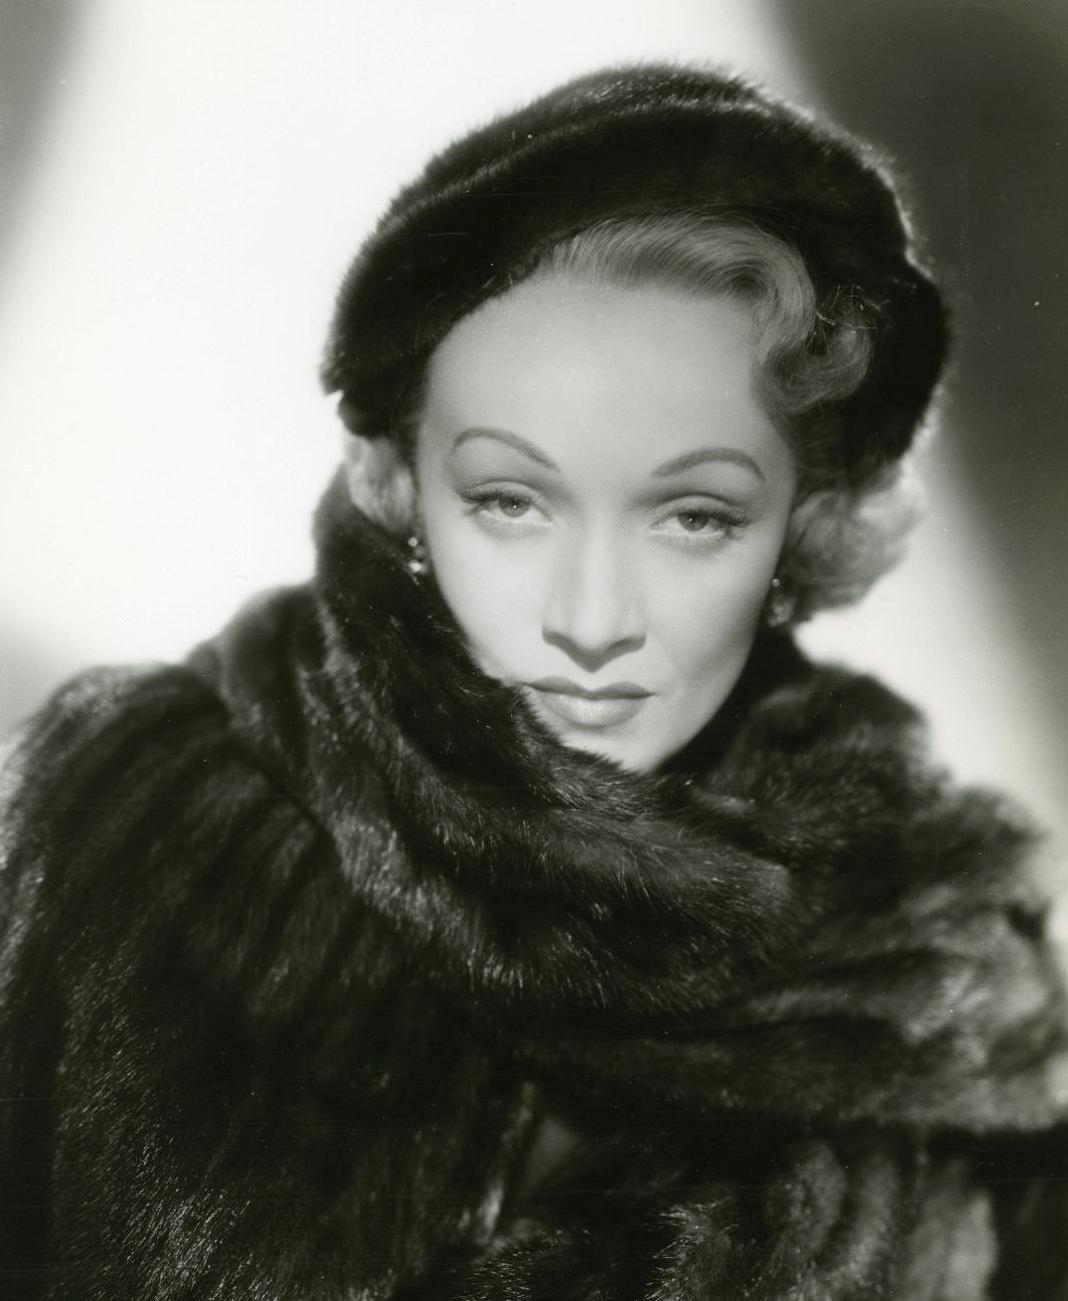 Publicity photo of Marlene Dietrich for the film "No Highway in the Sky" (1951). (Public Domain)